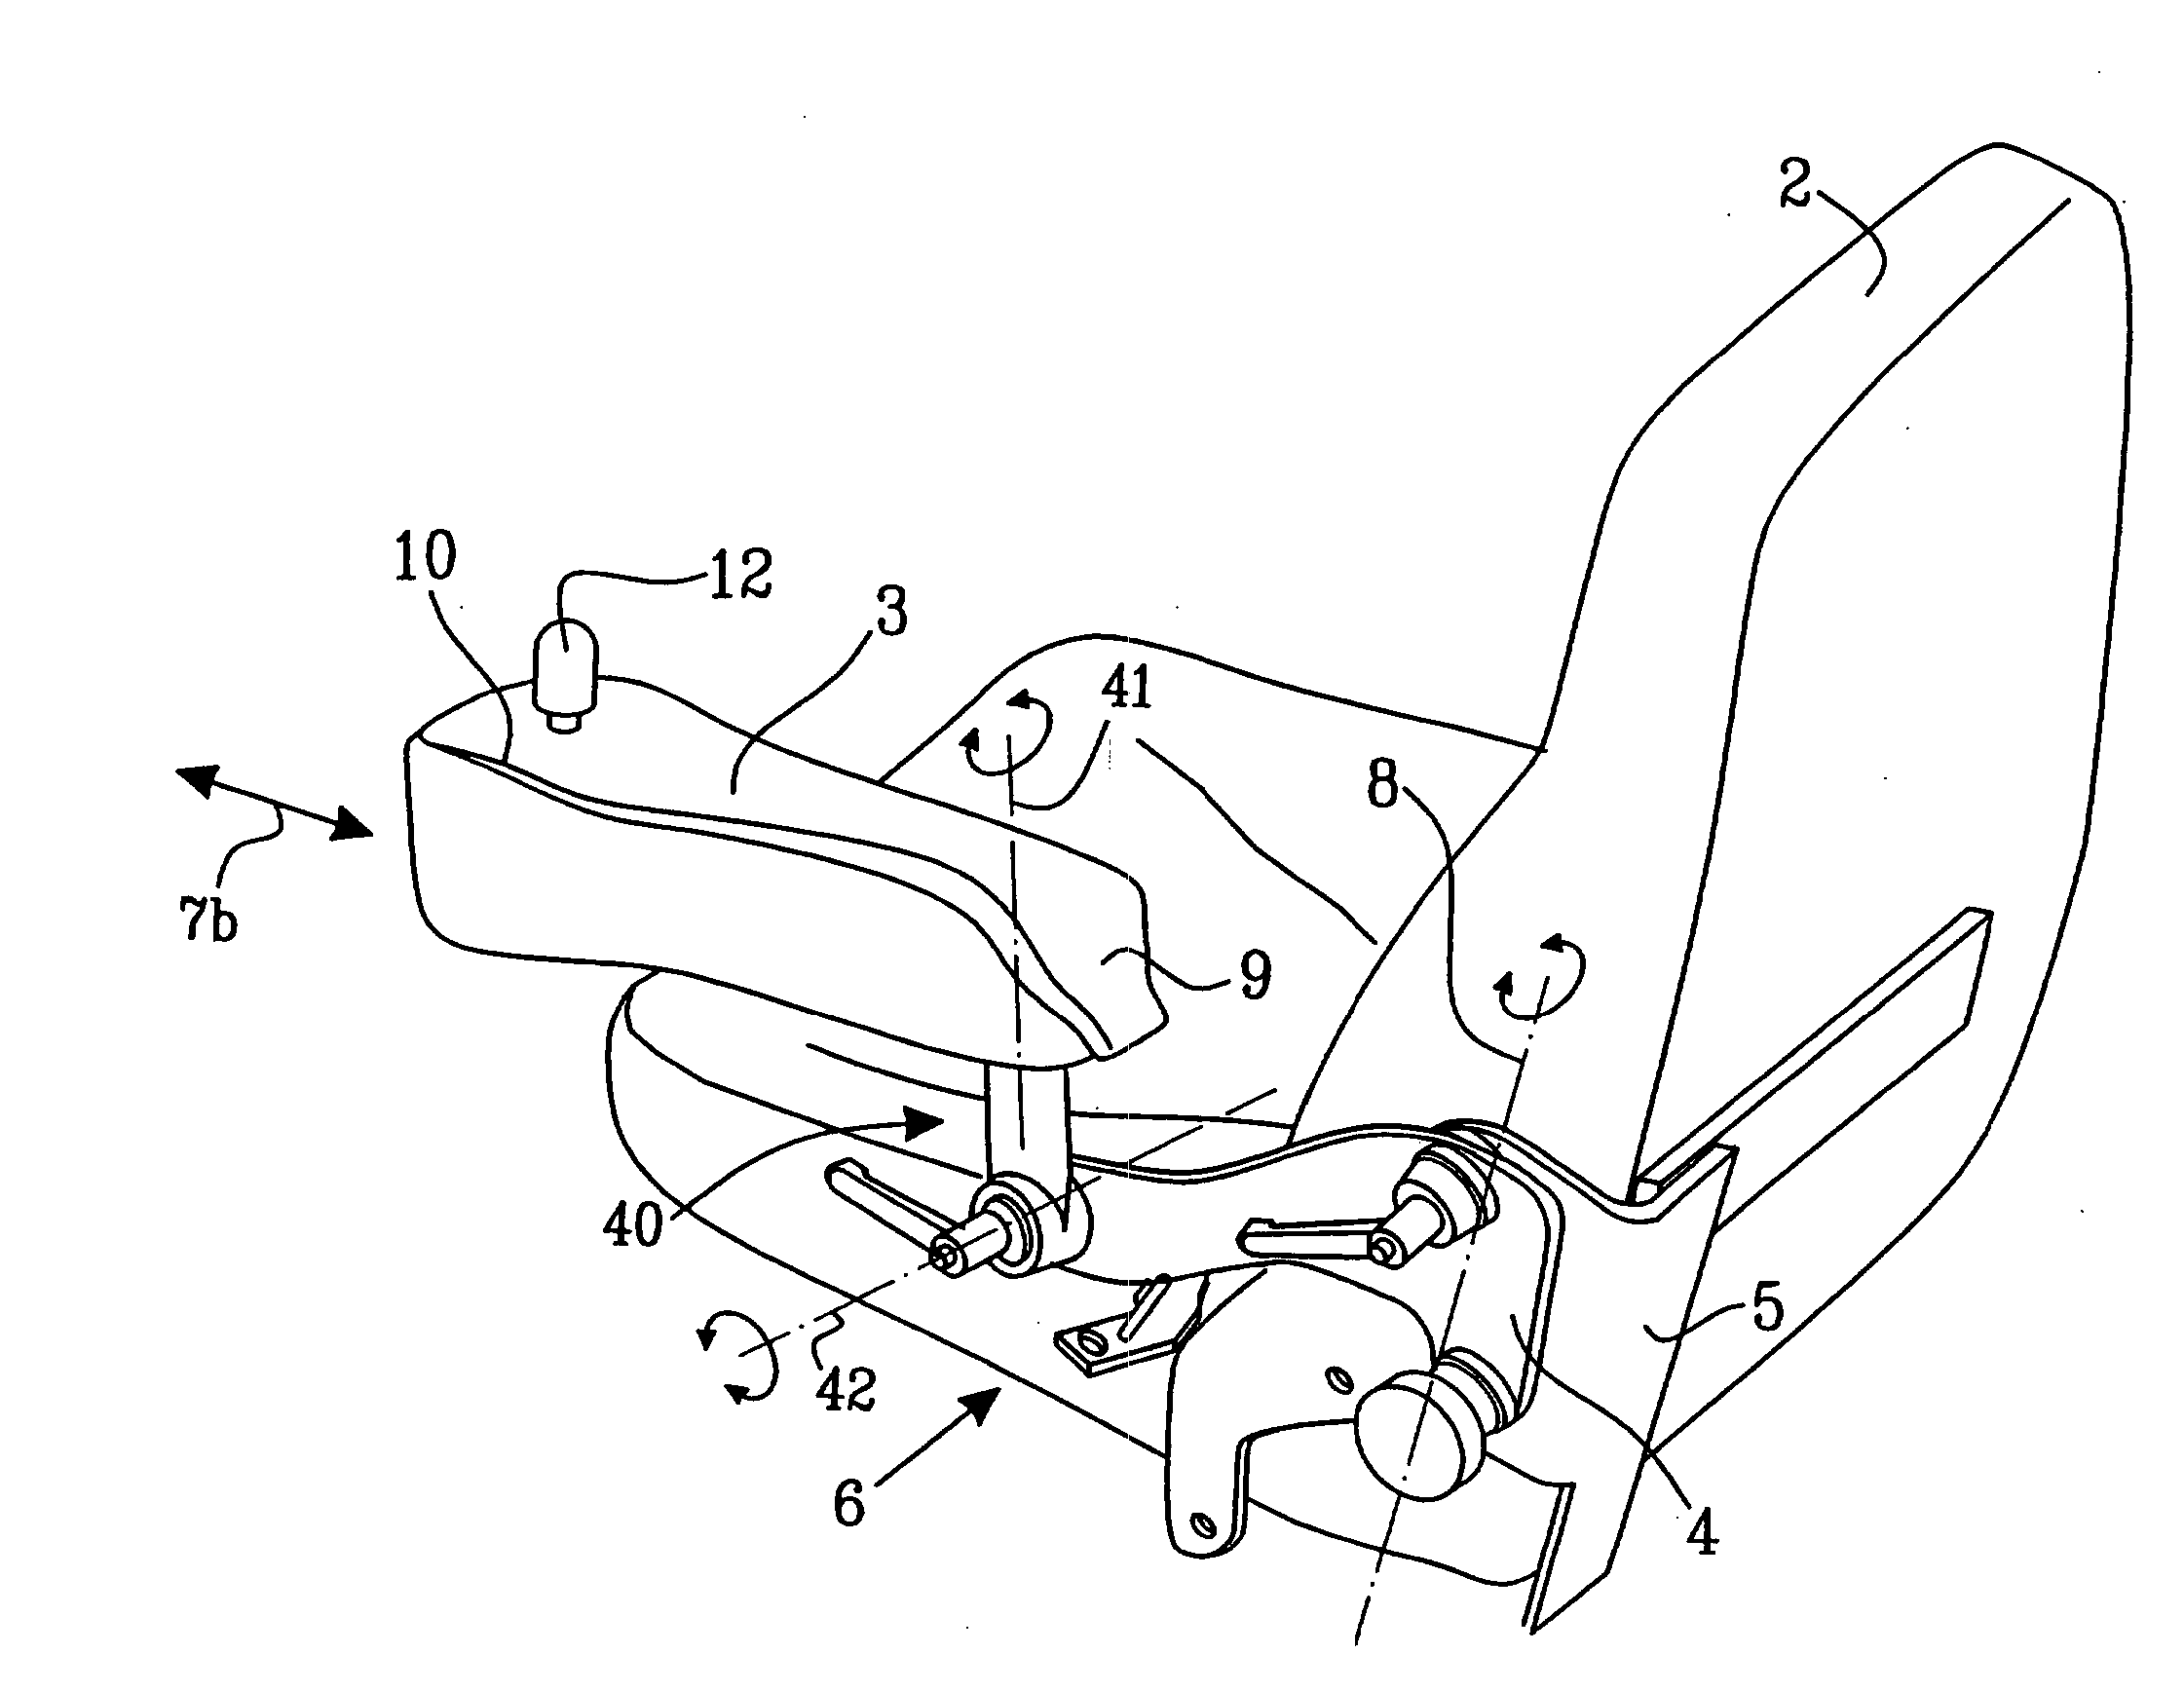 Armrest for use with a vehicle seat